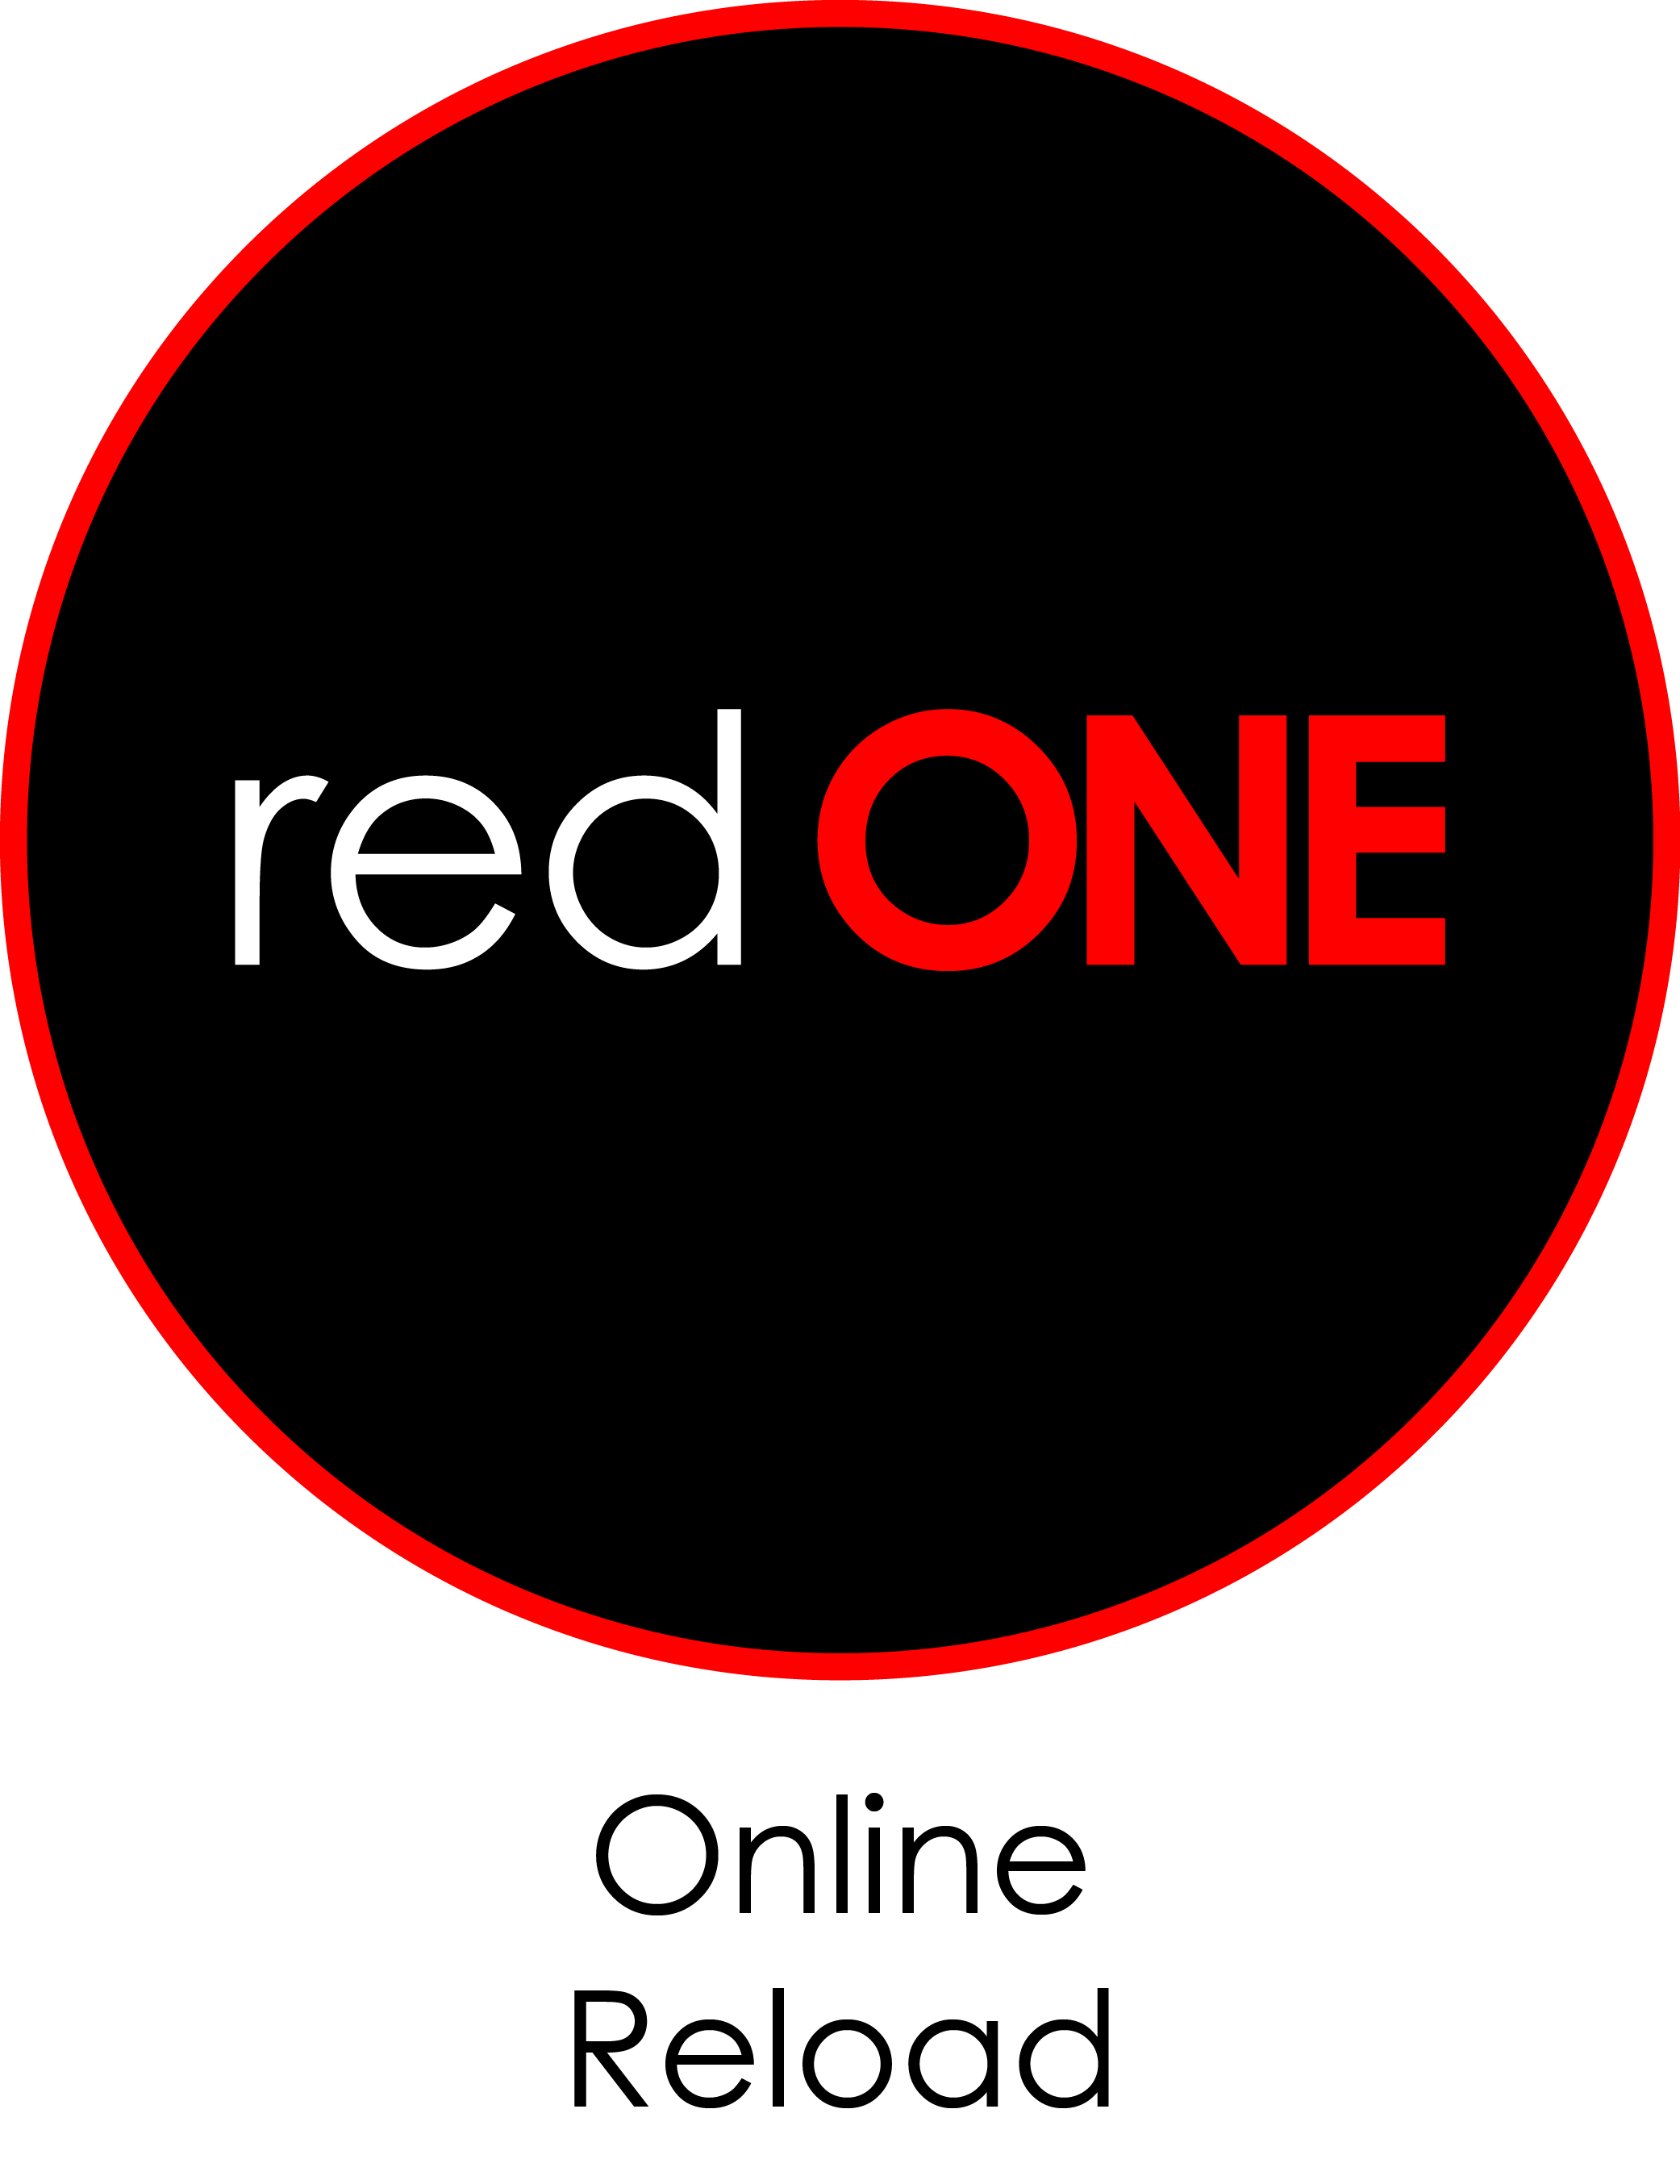 Red One Logo - Redone logo png 5 » PNG Image